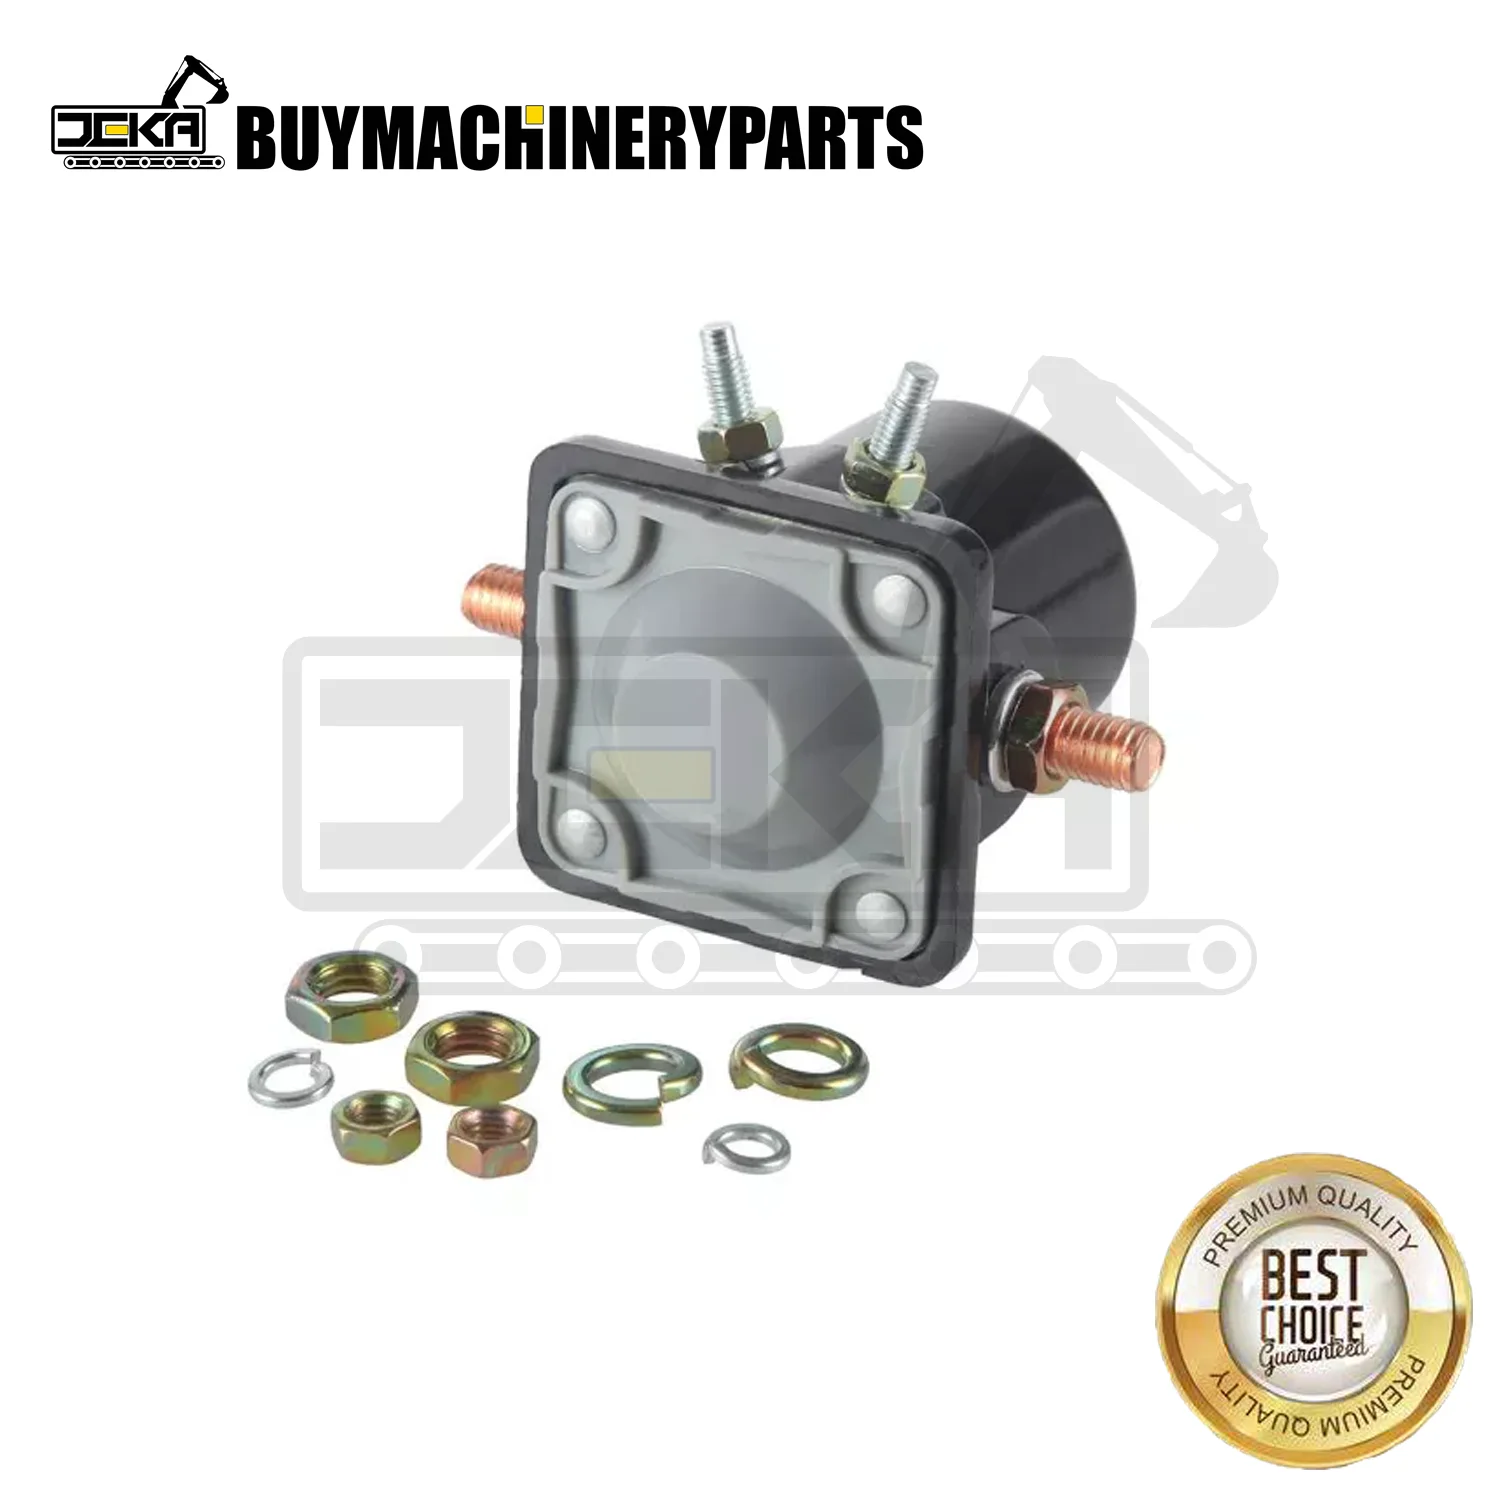 

SMR6003 Heavy Duty Diesel Starter Relay Solenoid Switch Compatible with Johnson OMC EVINRUDE Outboard 383622 395419 582708